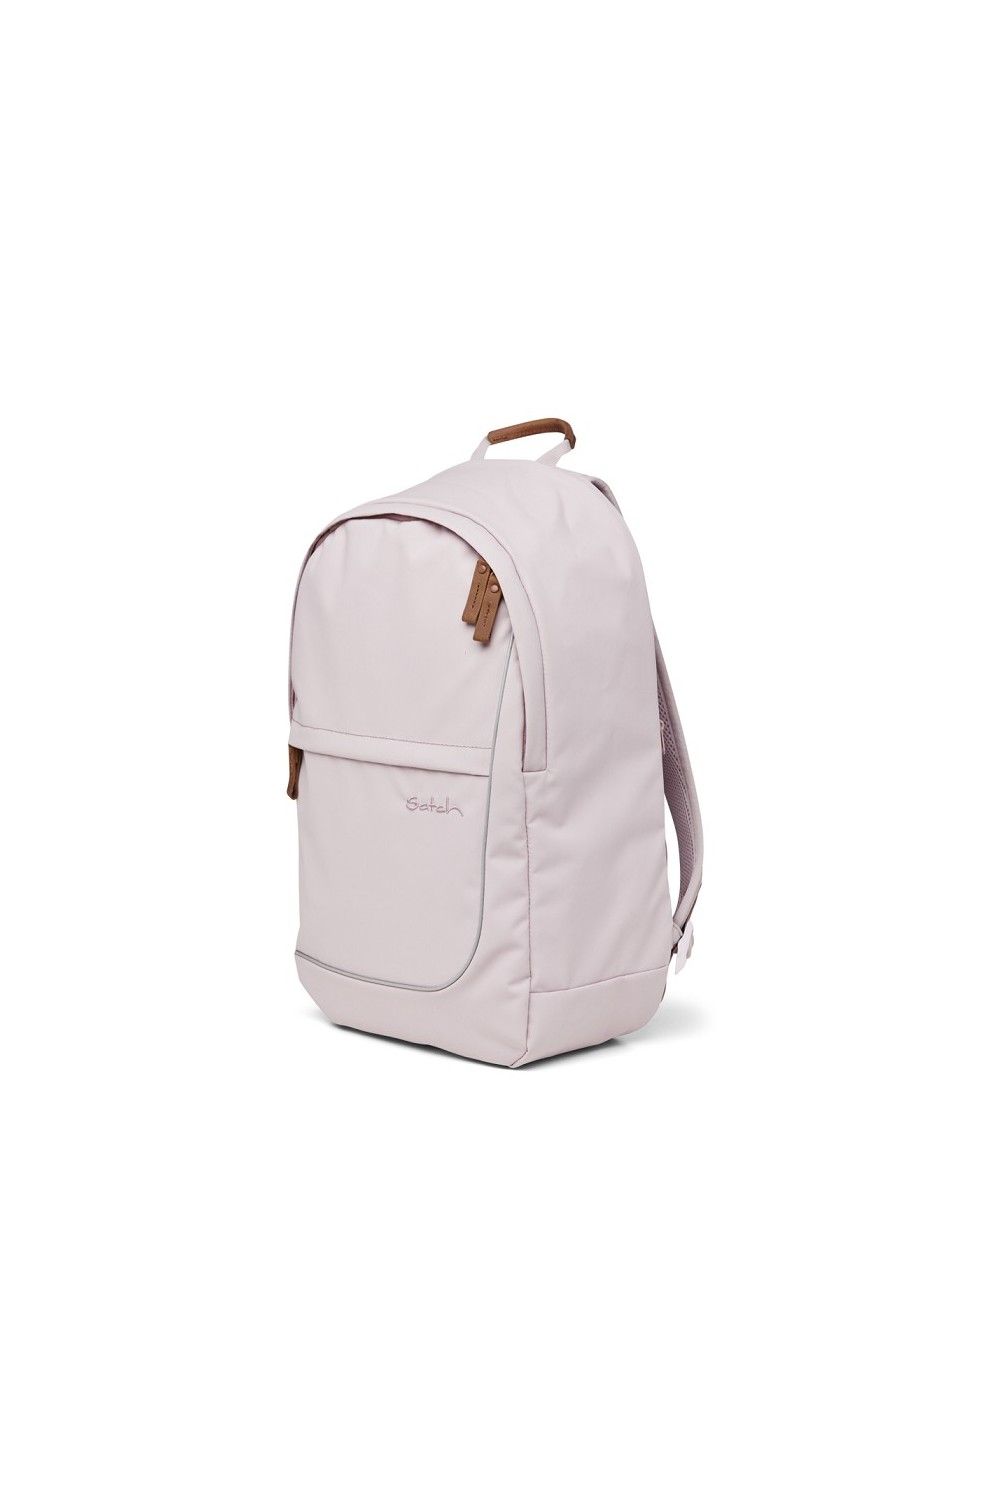 Satch Backpack Fly Nordic Rose